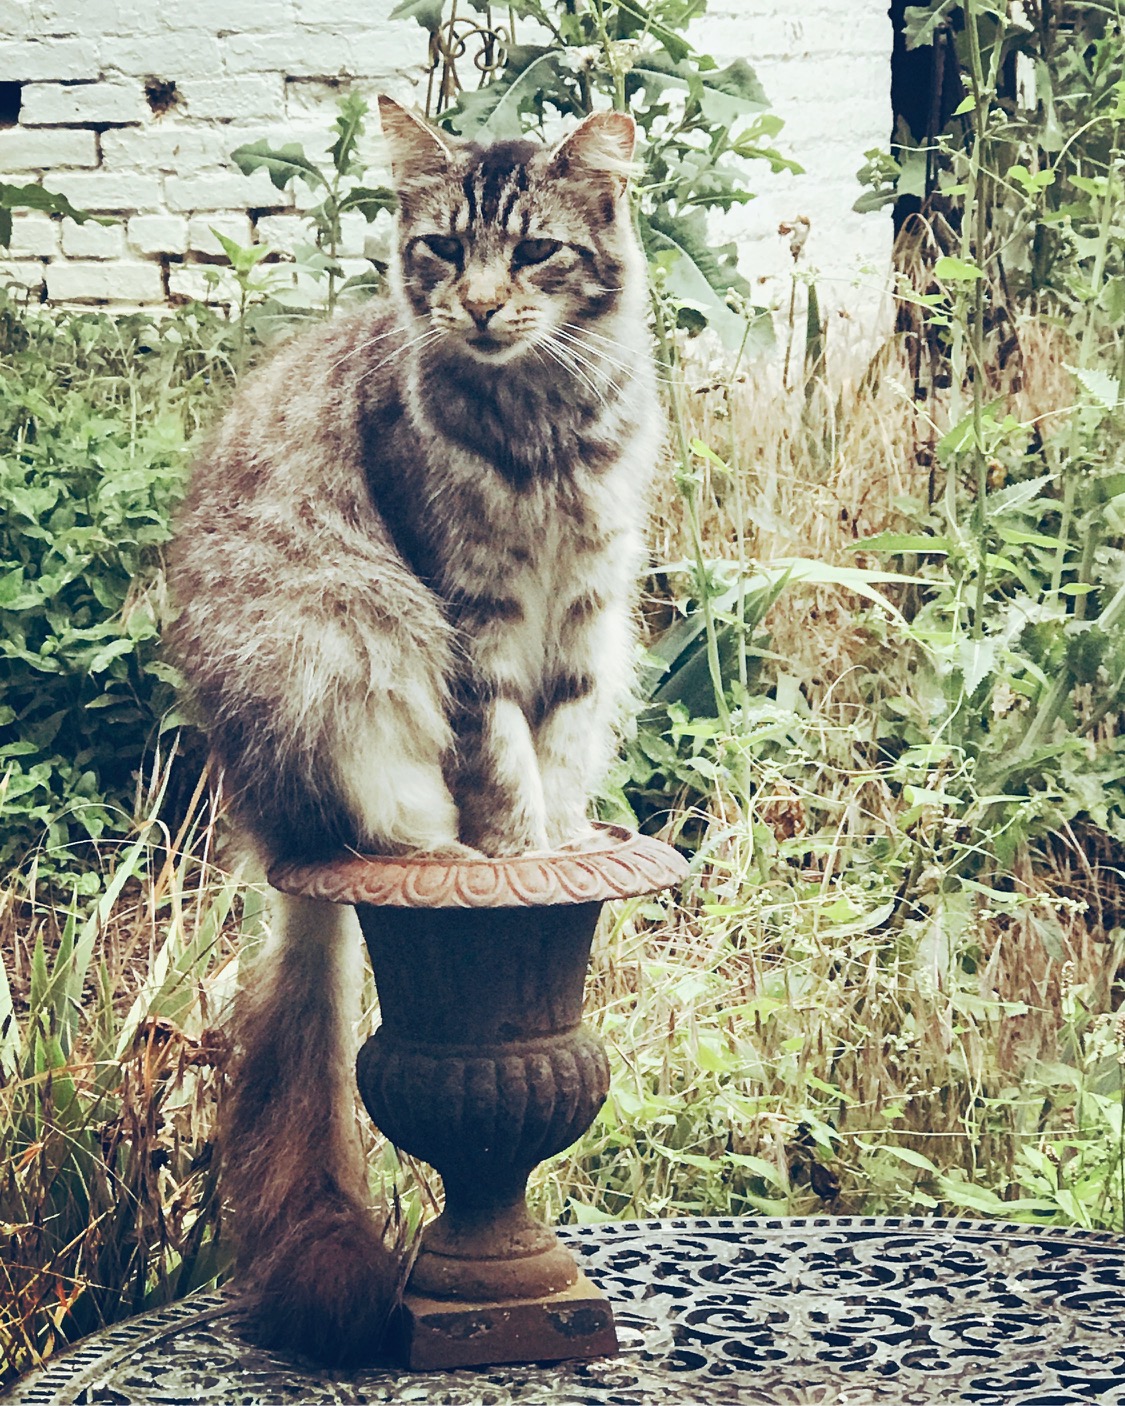 One of our sanctuary kitties thinking she will fit in a planter.